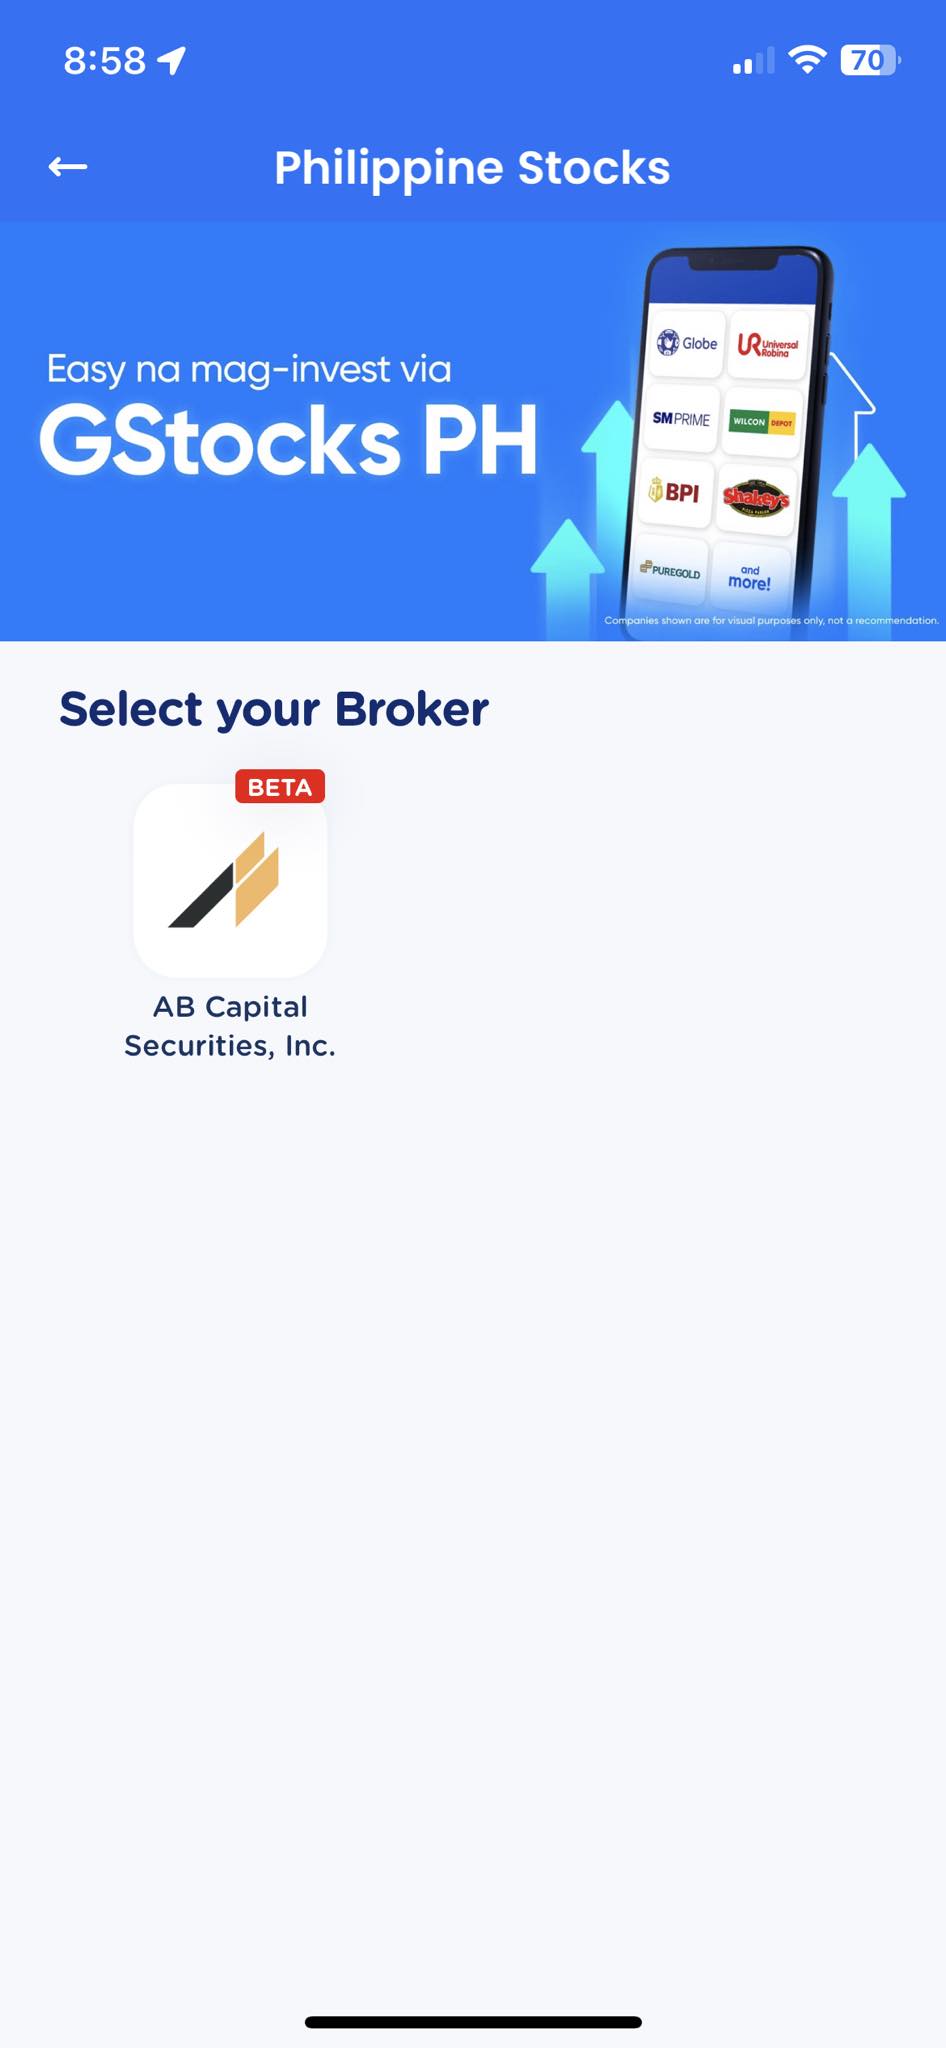 GCASH Now Offers GStocks for Hassle-free Investments in the Stock Market